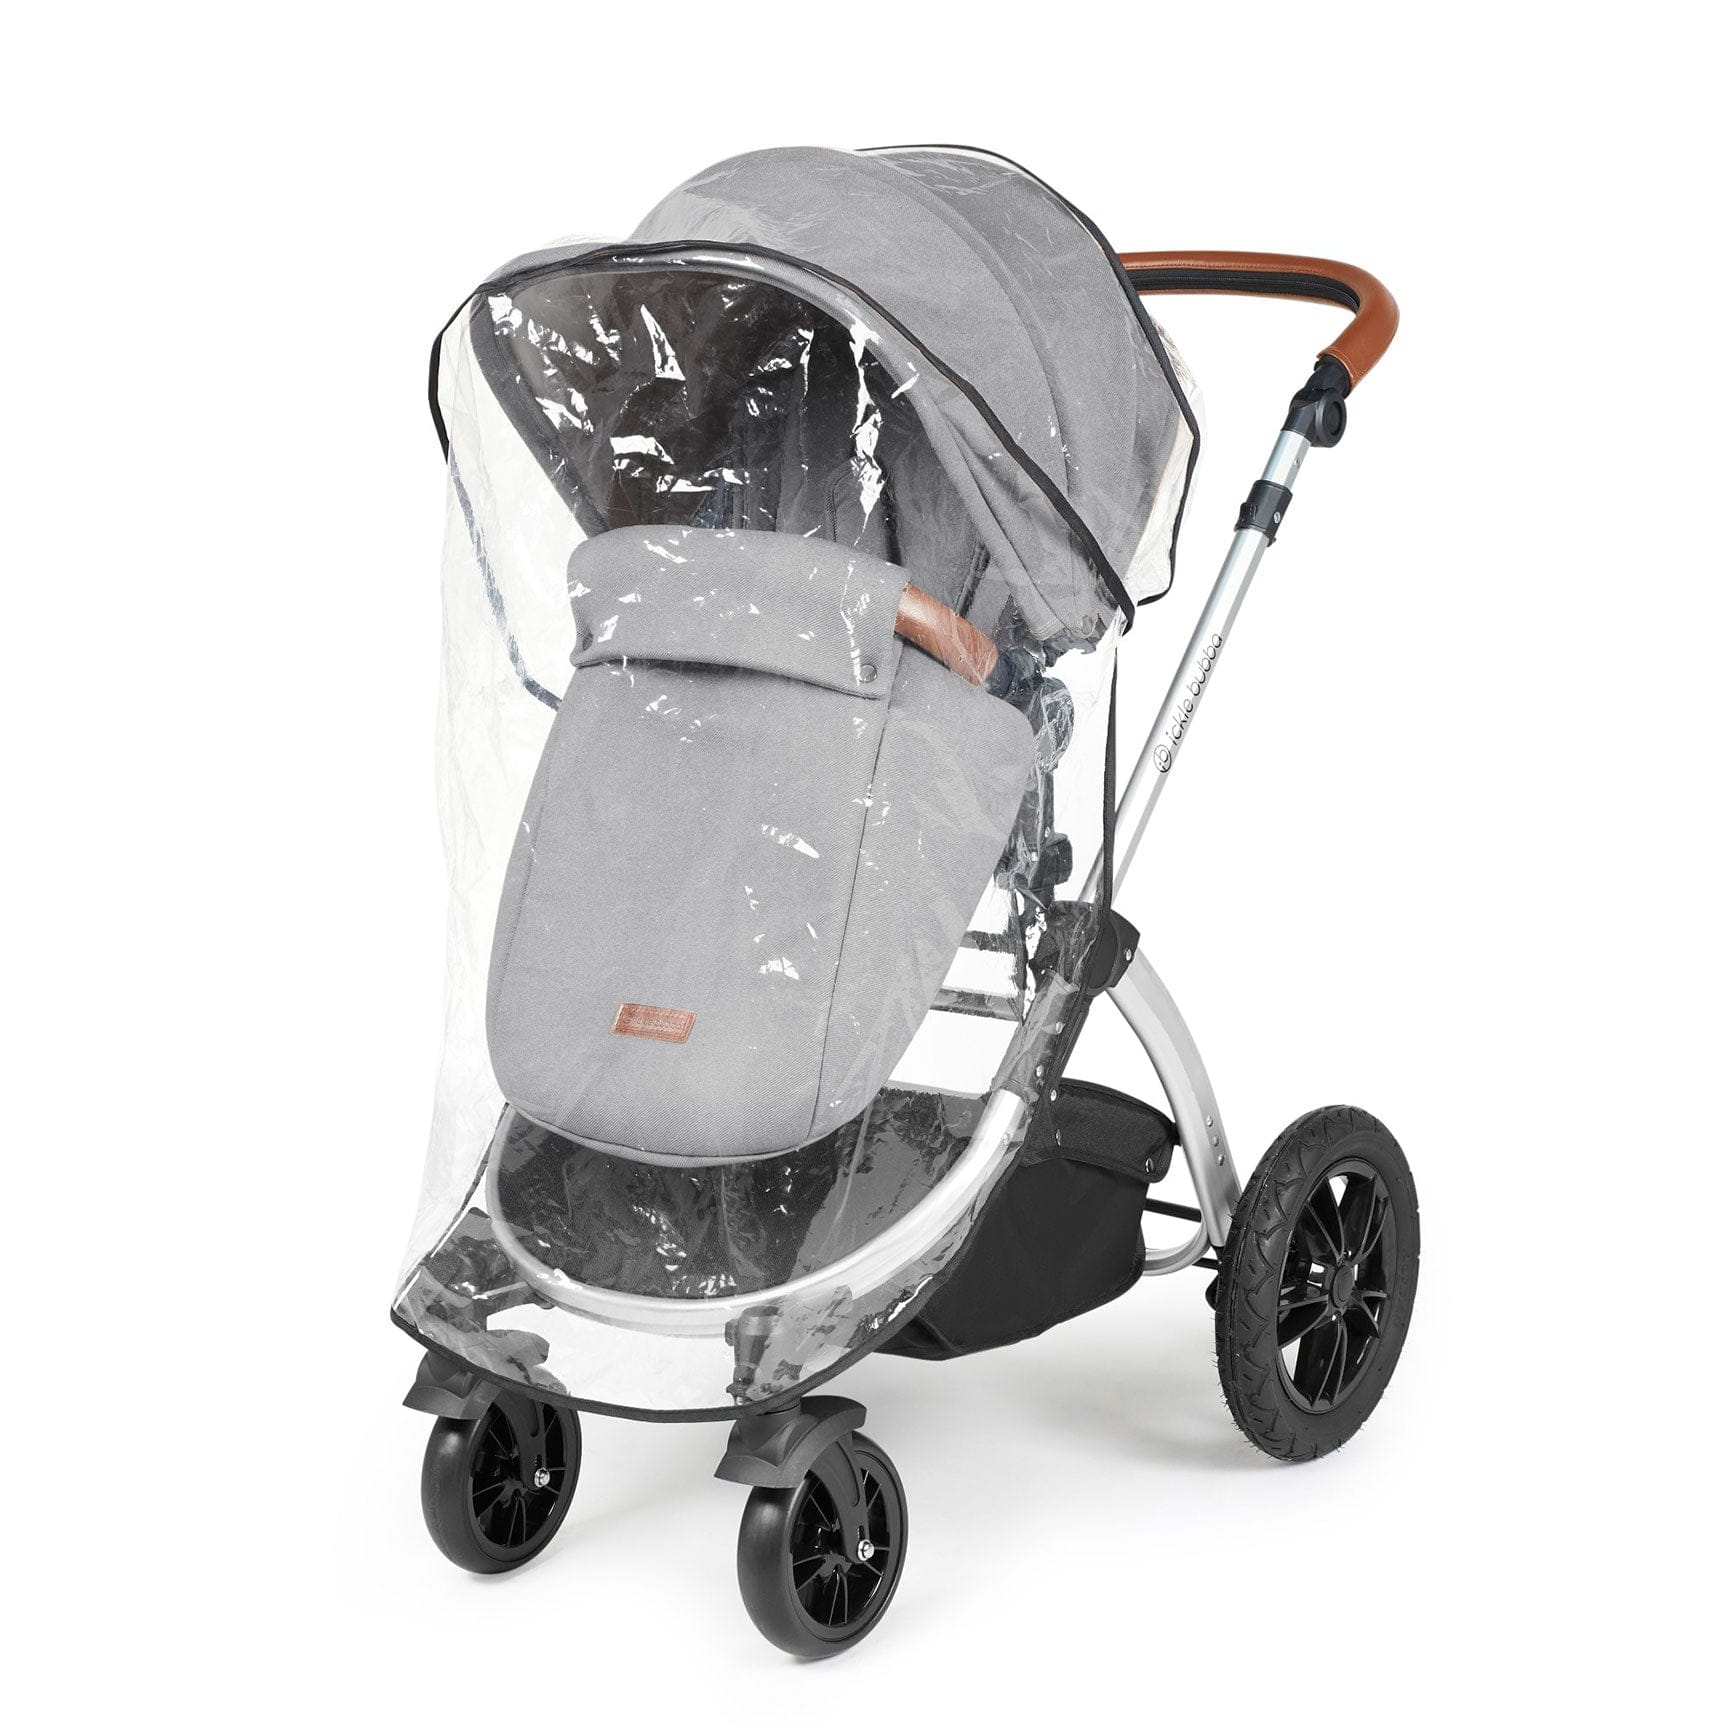 Ickle Bubba travel systems Ickle Bubba Stomp Luxe All-in-One Travel System with Isofix Base - Silver/Pearl Grey/Tan 10-011-300-260